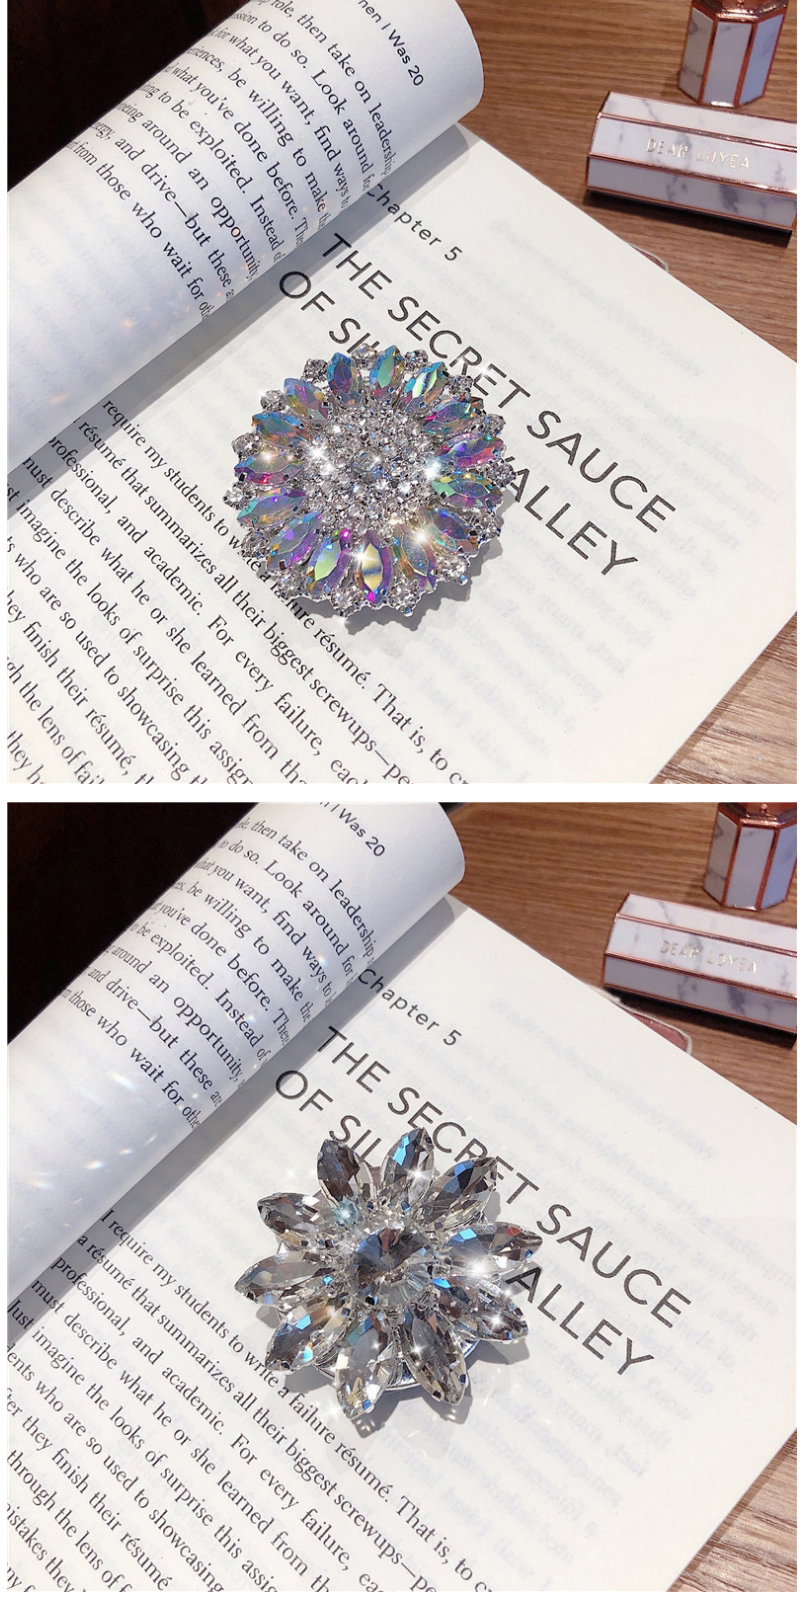 Fashion No. 6 Flower Long Diamond-colorful Jeweled Cubic Crystal Stand Ring Clasp,Household goods